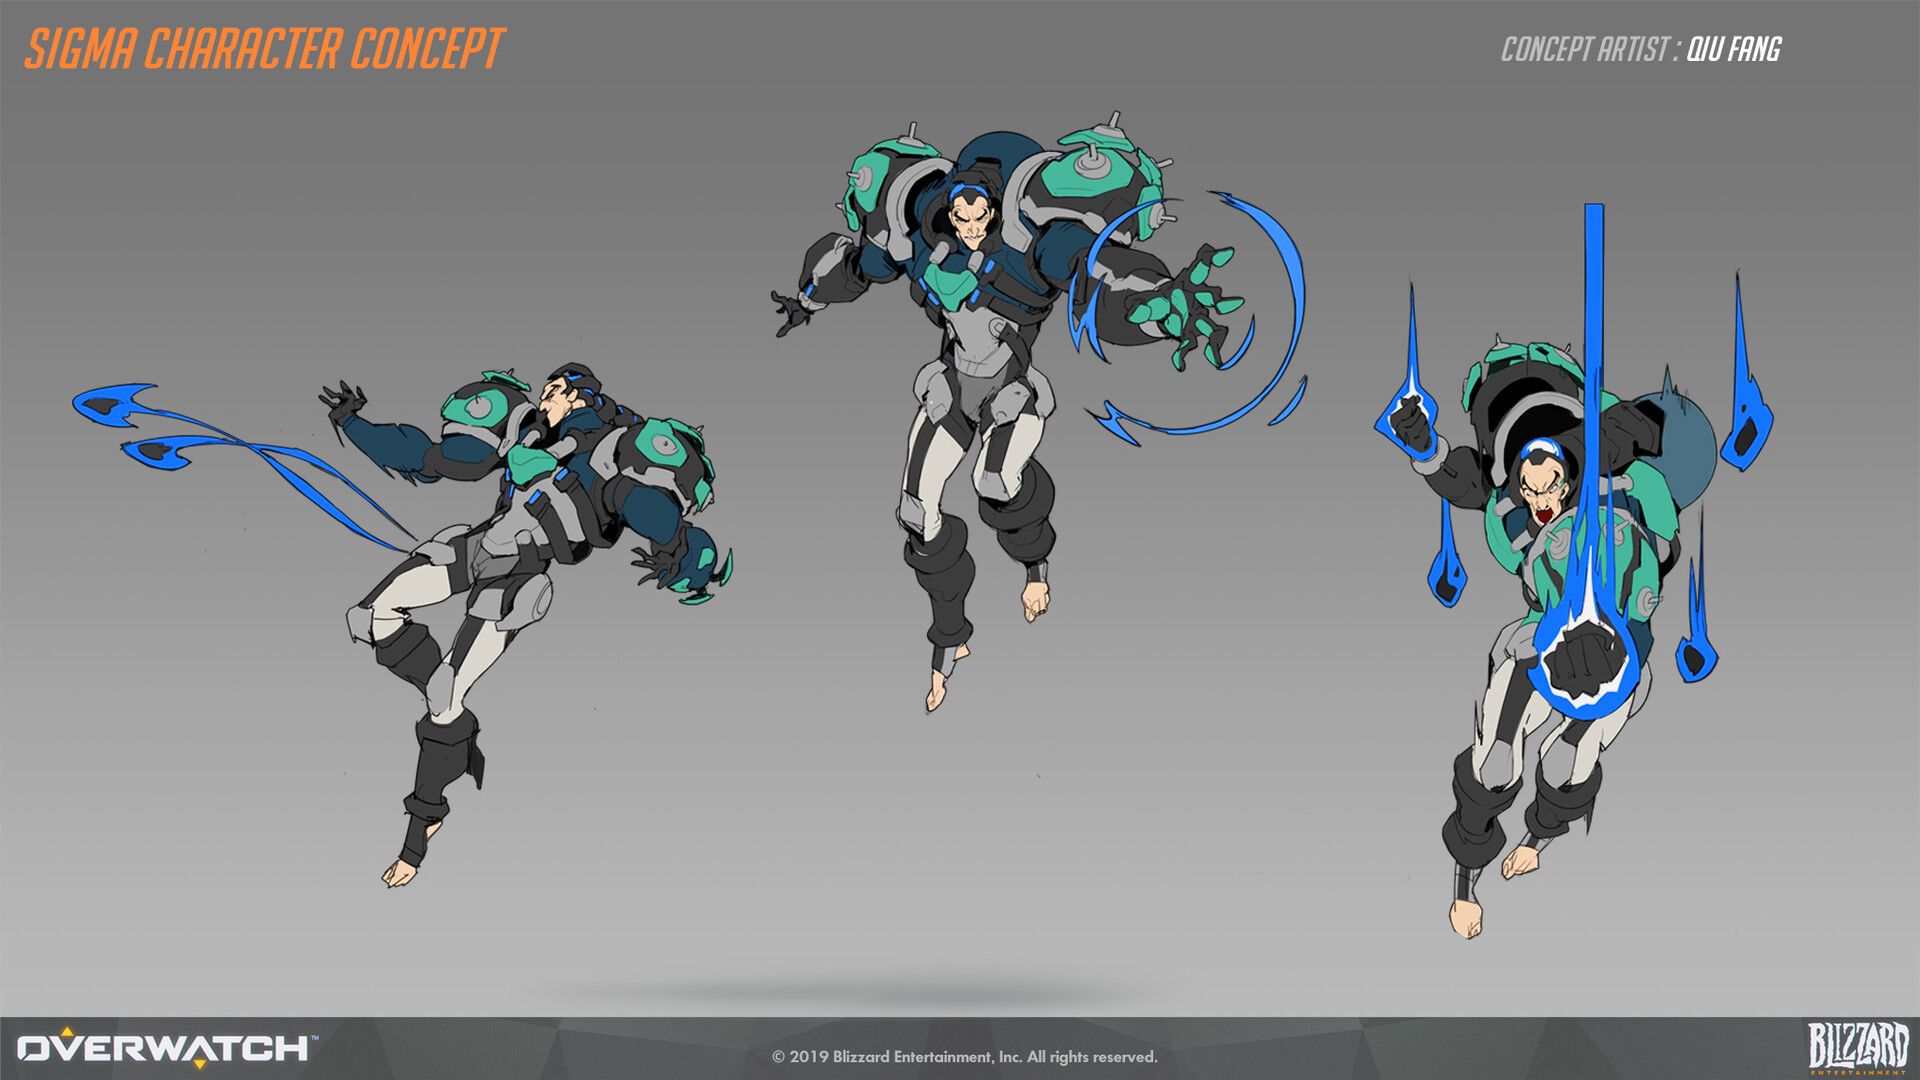 Overwatch: Sigma Character Concept, Qiu Fang